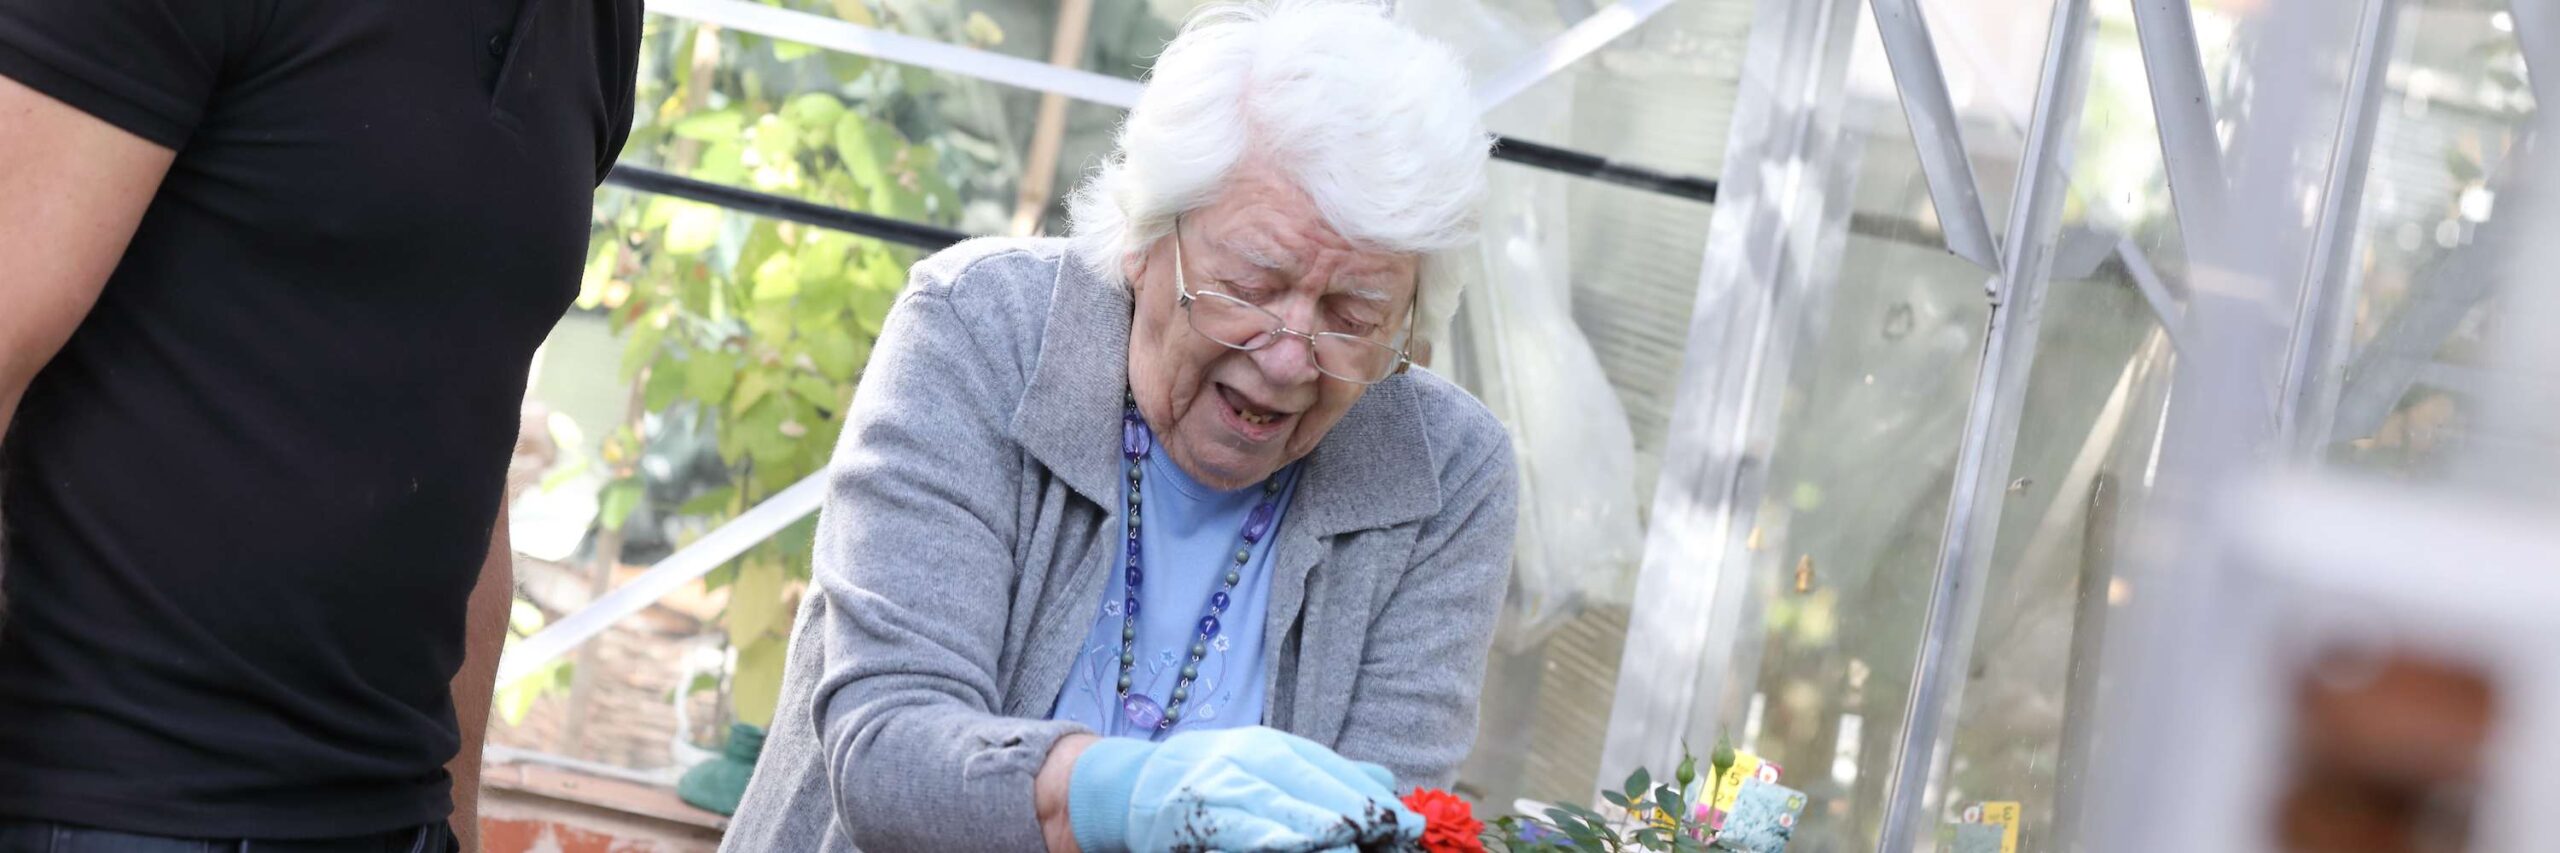 CCH Kingsleigh Image showing resident getting involved with gardening in our greenhouse